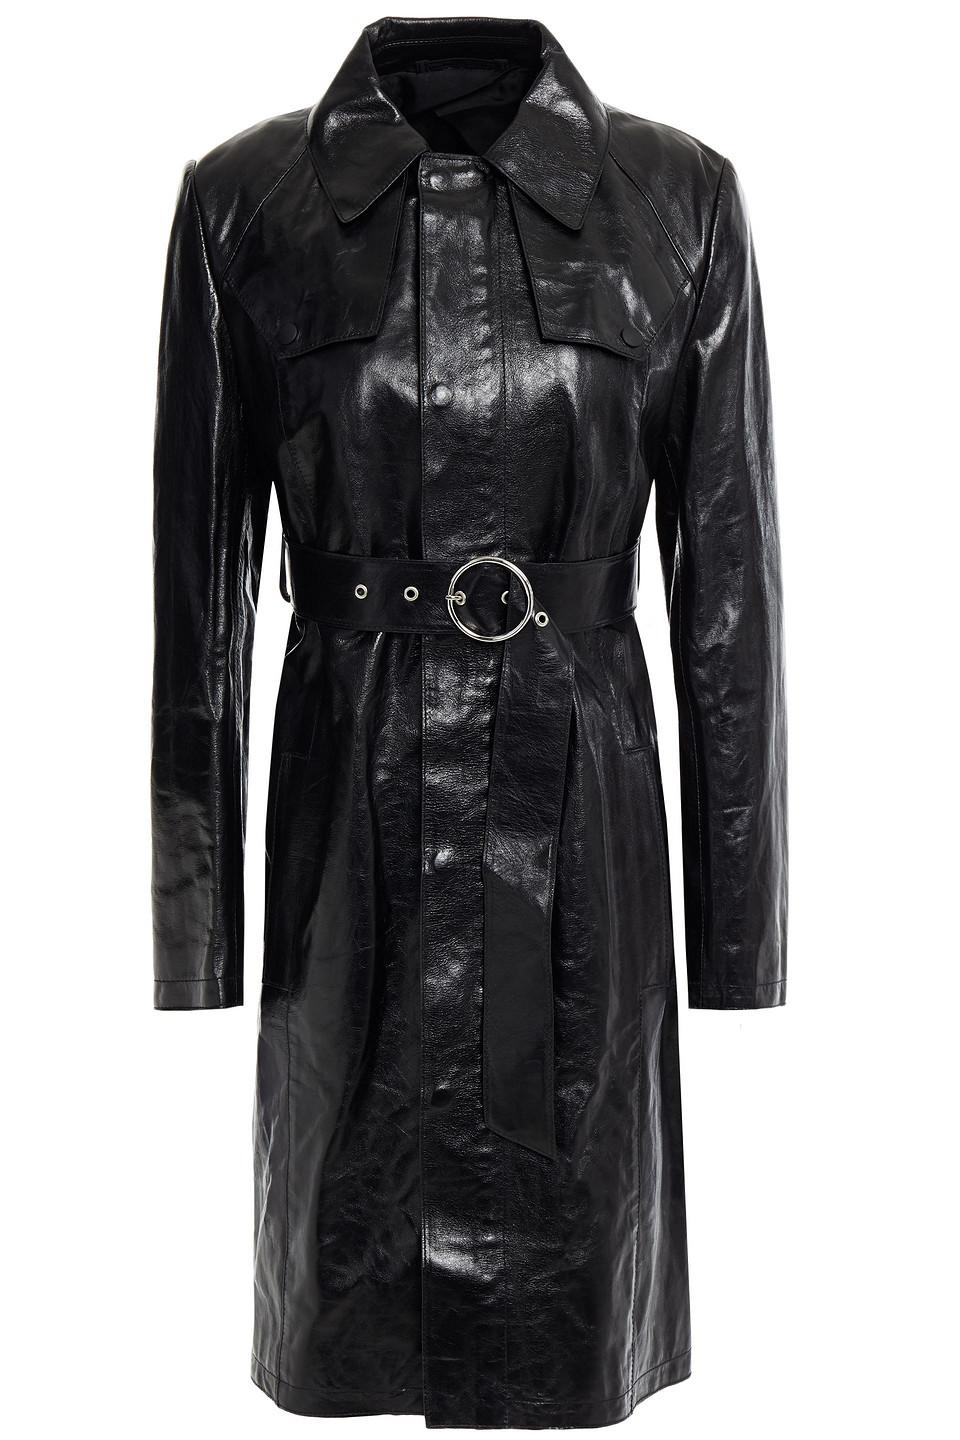 Maison Margiela Belted Glossed-leather Trench Coat in Black | Lyst